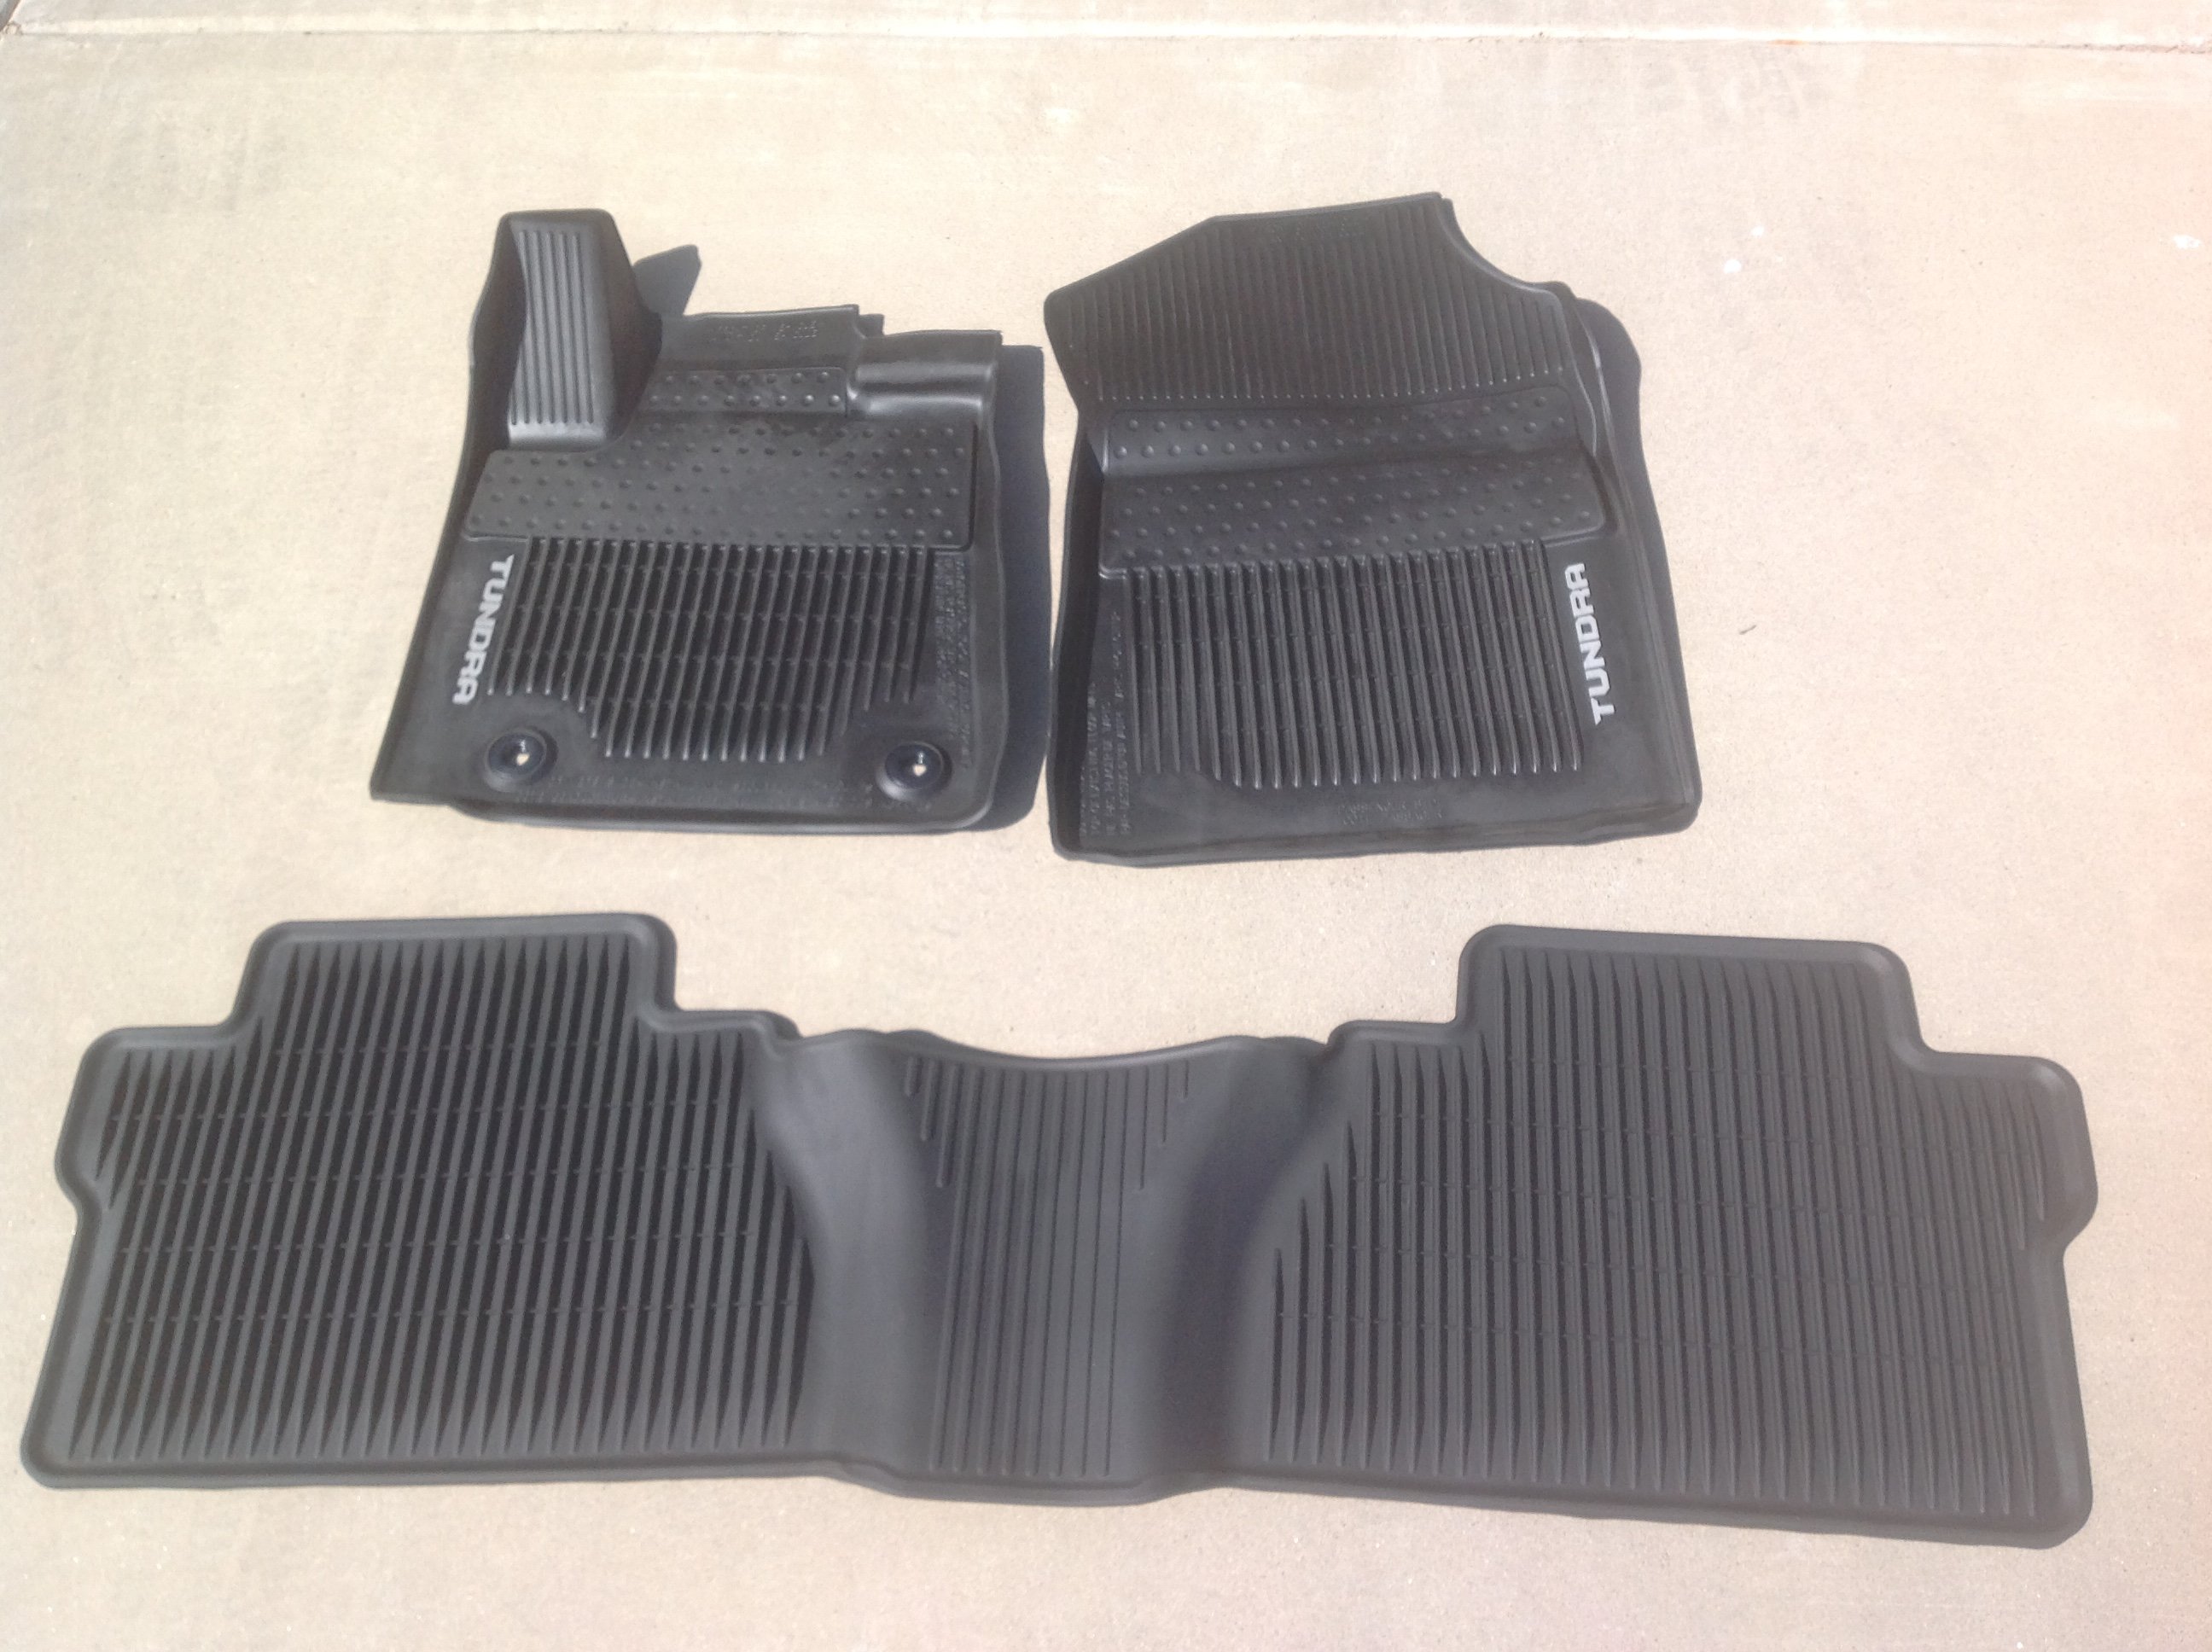 SOLD...New Tundra all weather floor mats - Classified Ads